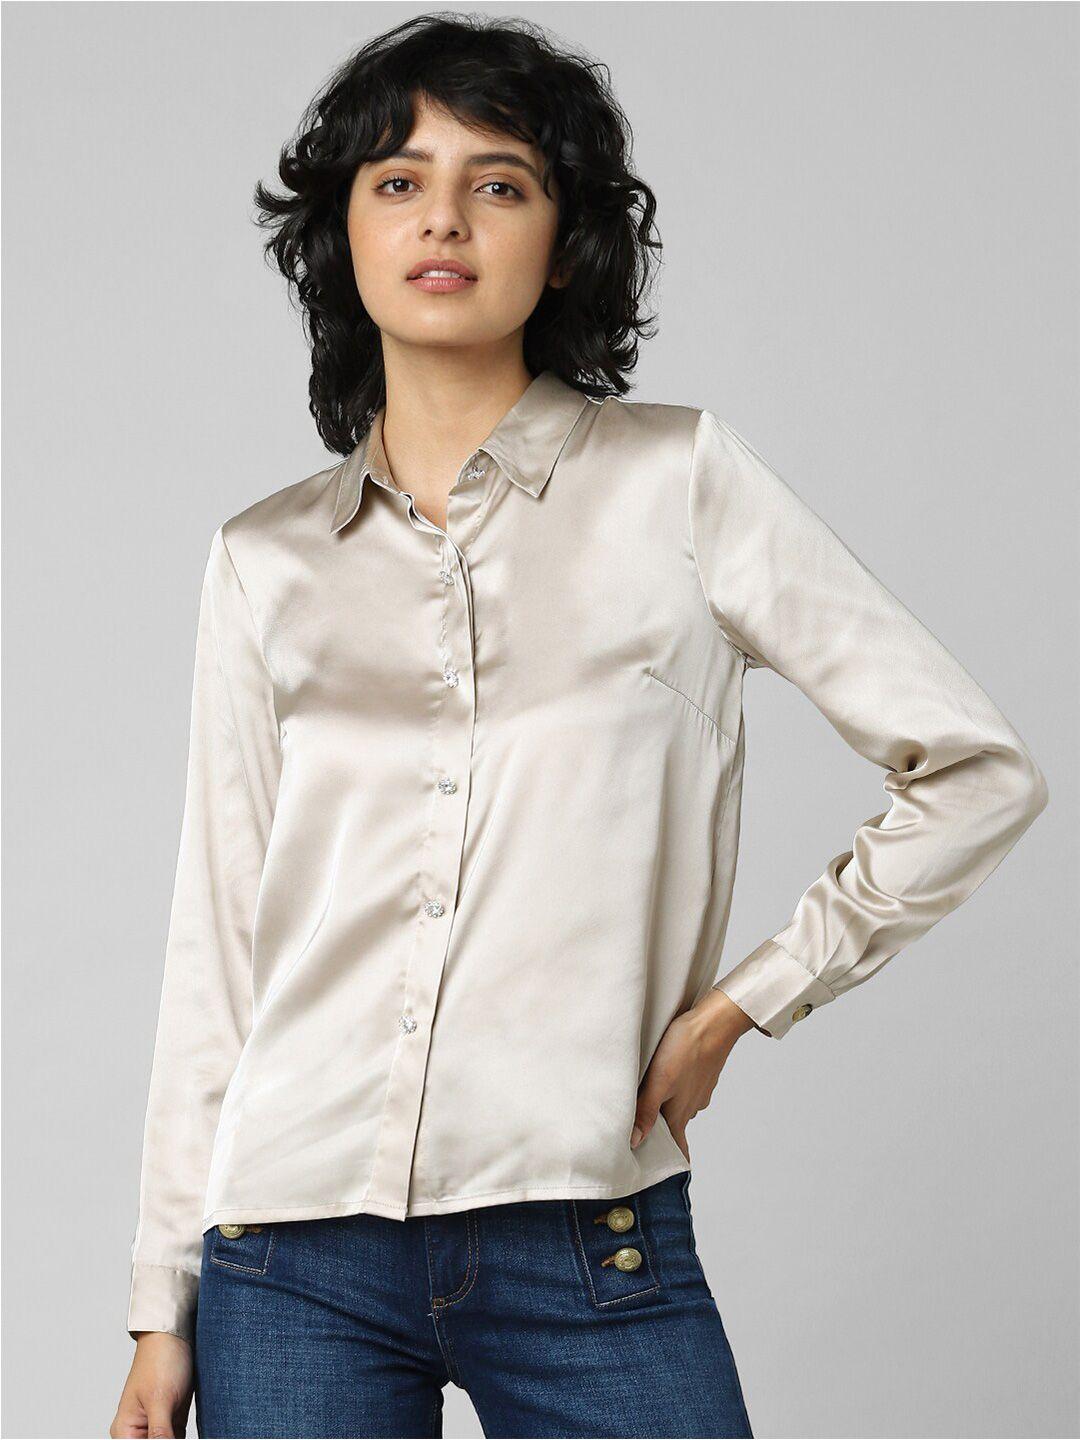 only women cuffed sleeves casual shirt